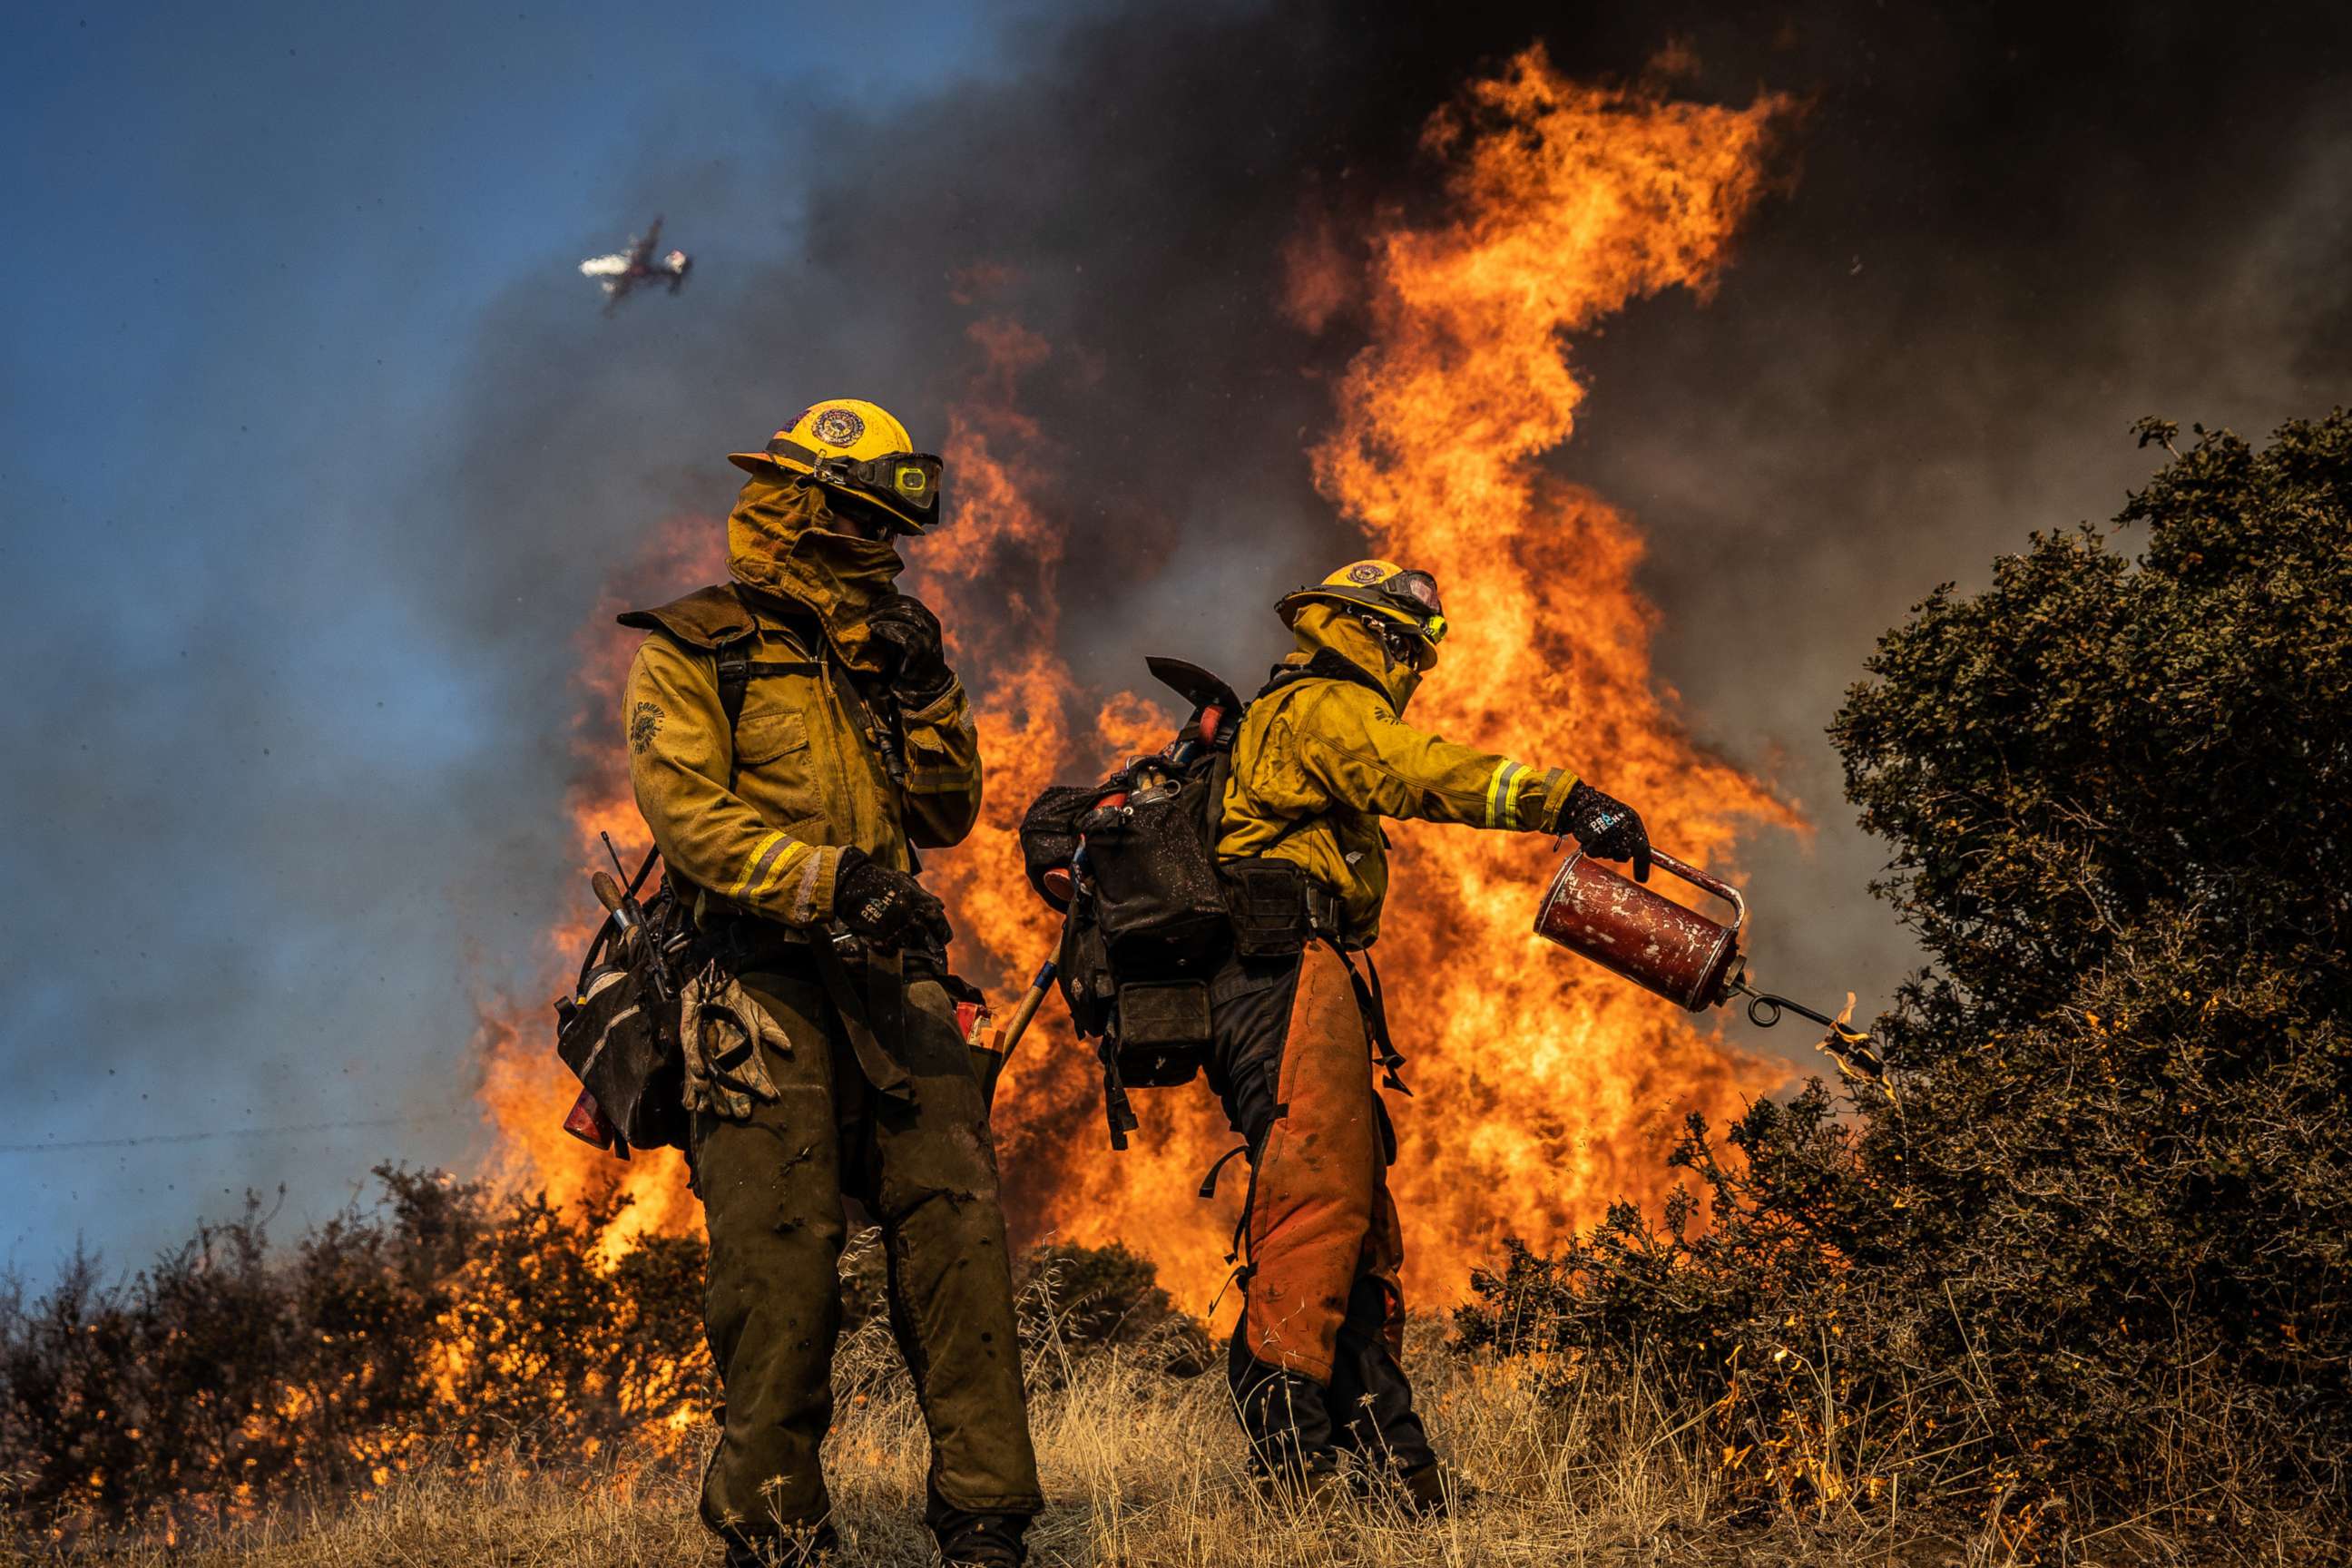 PHOTO: Firefighters with the Marin County Fire Department burn brush ahead of the Kincade Fire in an effort to reduce fuel and increase containment, in the Geysers, a geothermal field in California on Friday, Oct. 25, 2019.